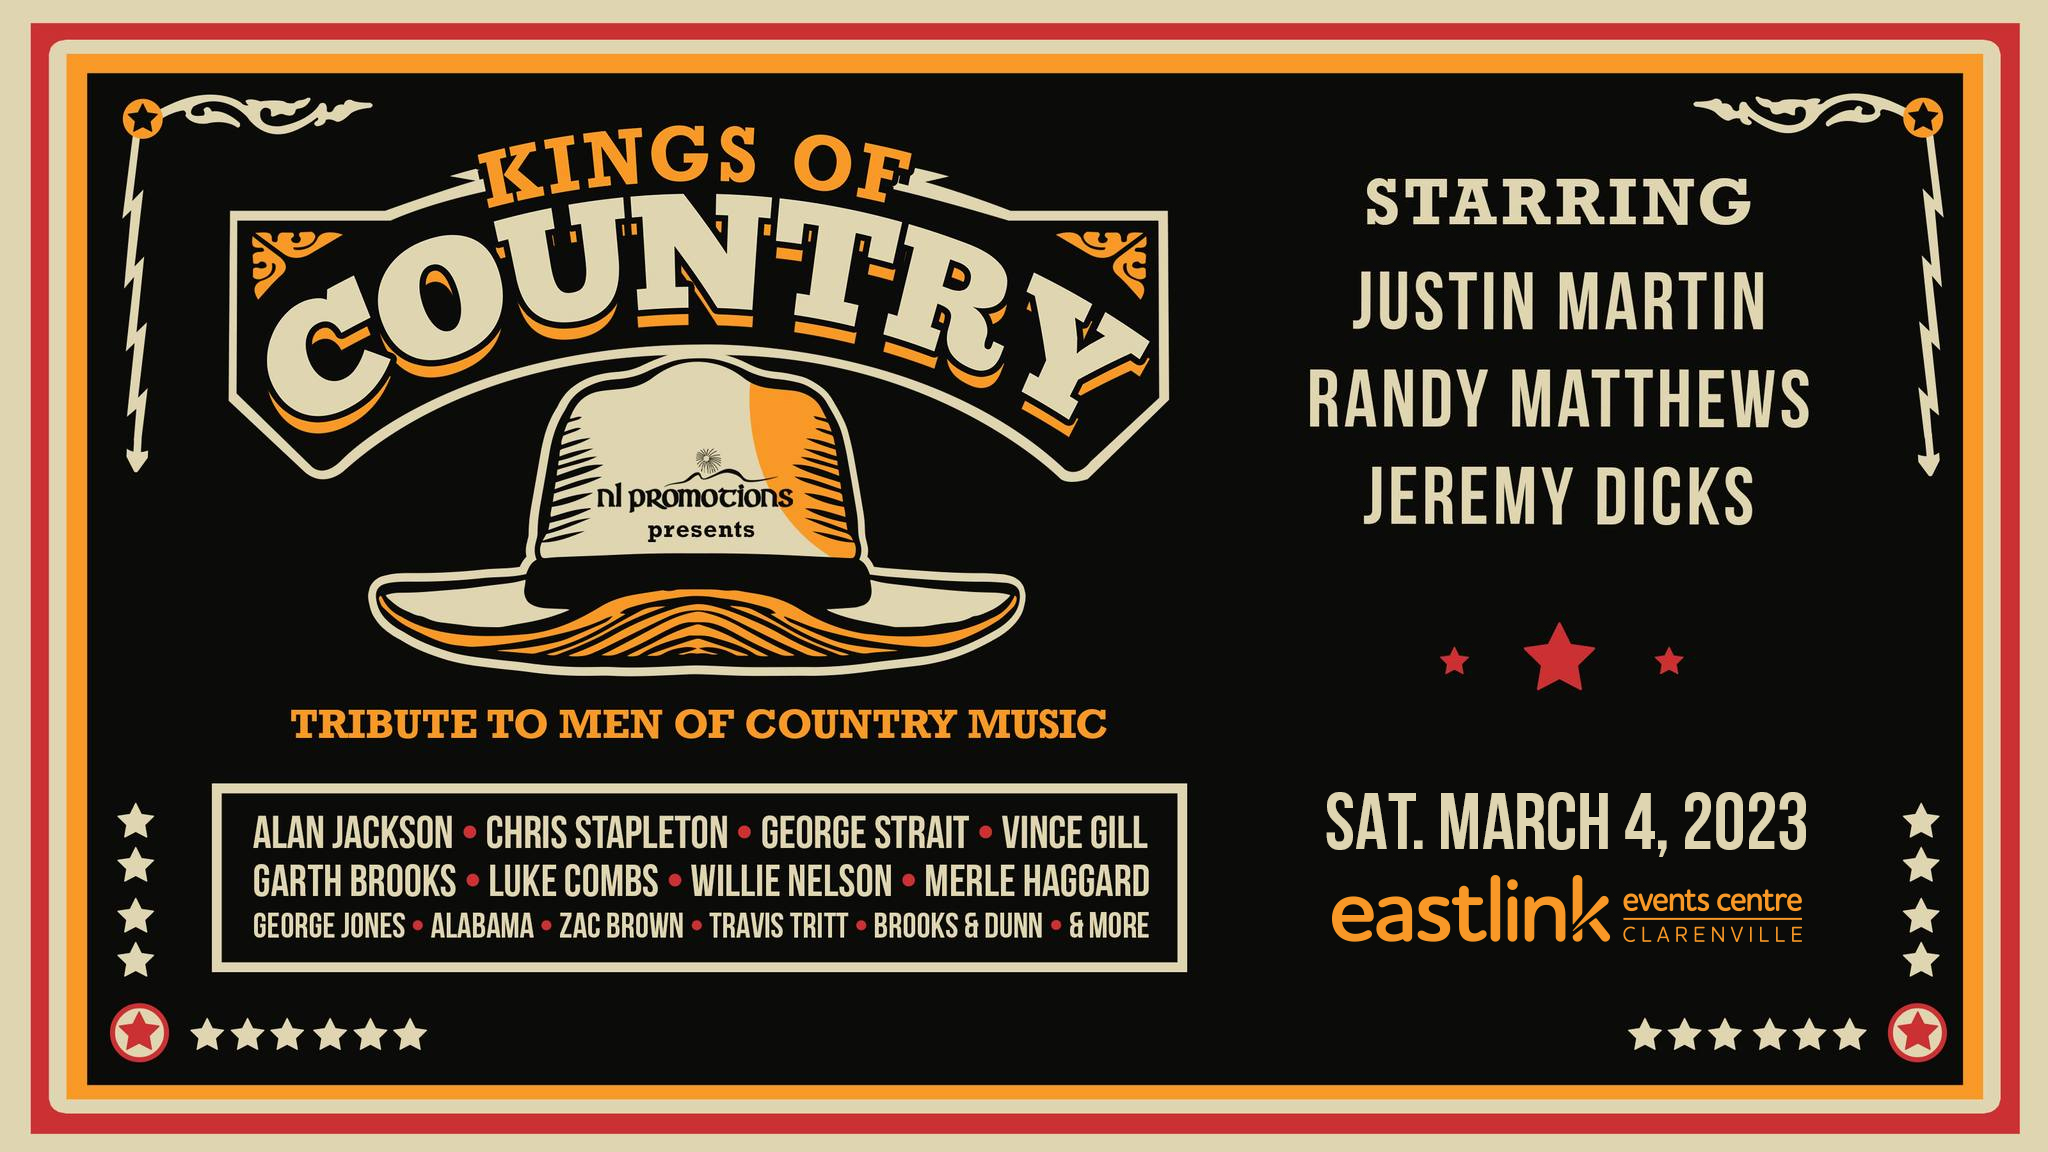 Kings of Country - A Tribute to the Cowboys of County Music